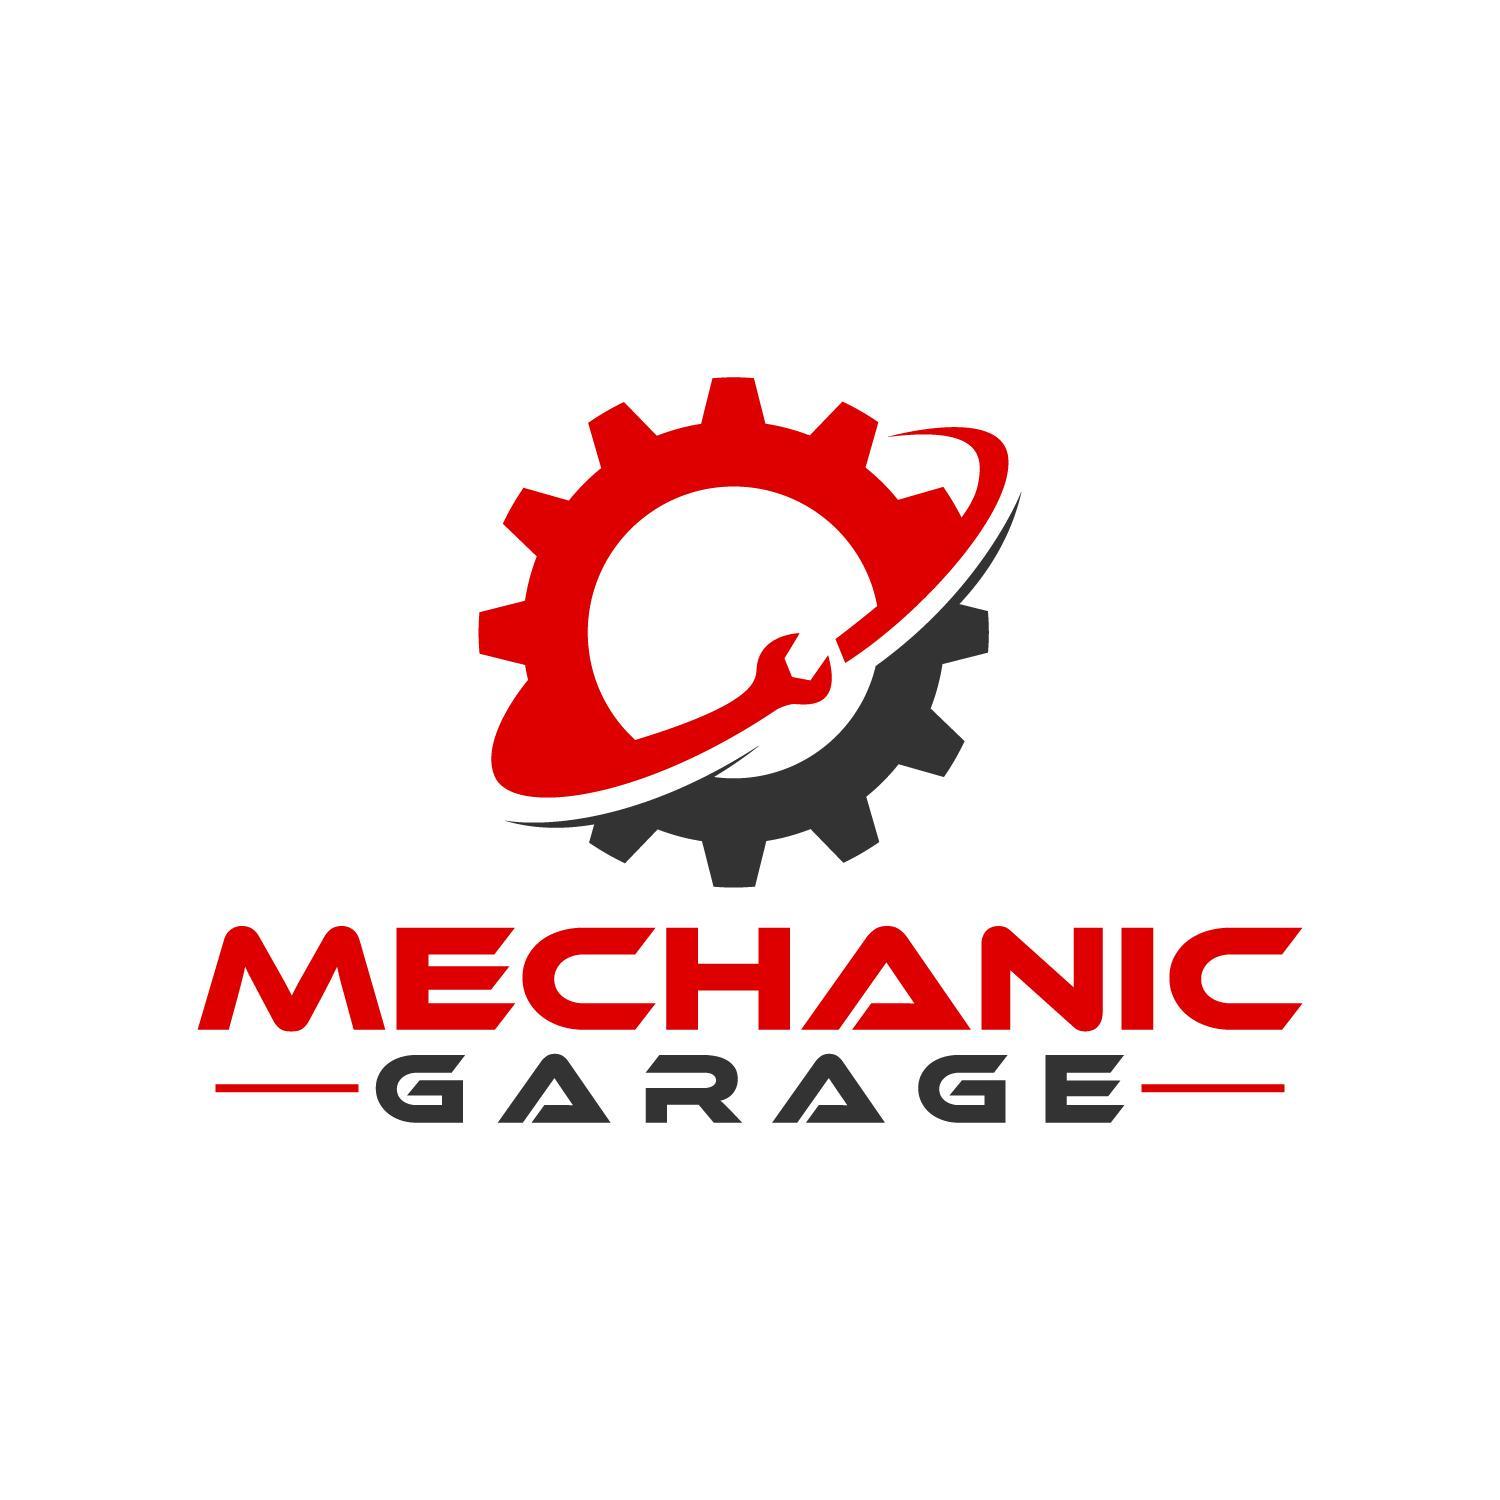 Directory for automobile repair shops and companies, auto spare part dealers, heavy duty engines and trucks repairers, auto service stations, automobile dealers